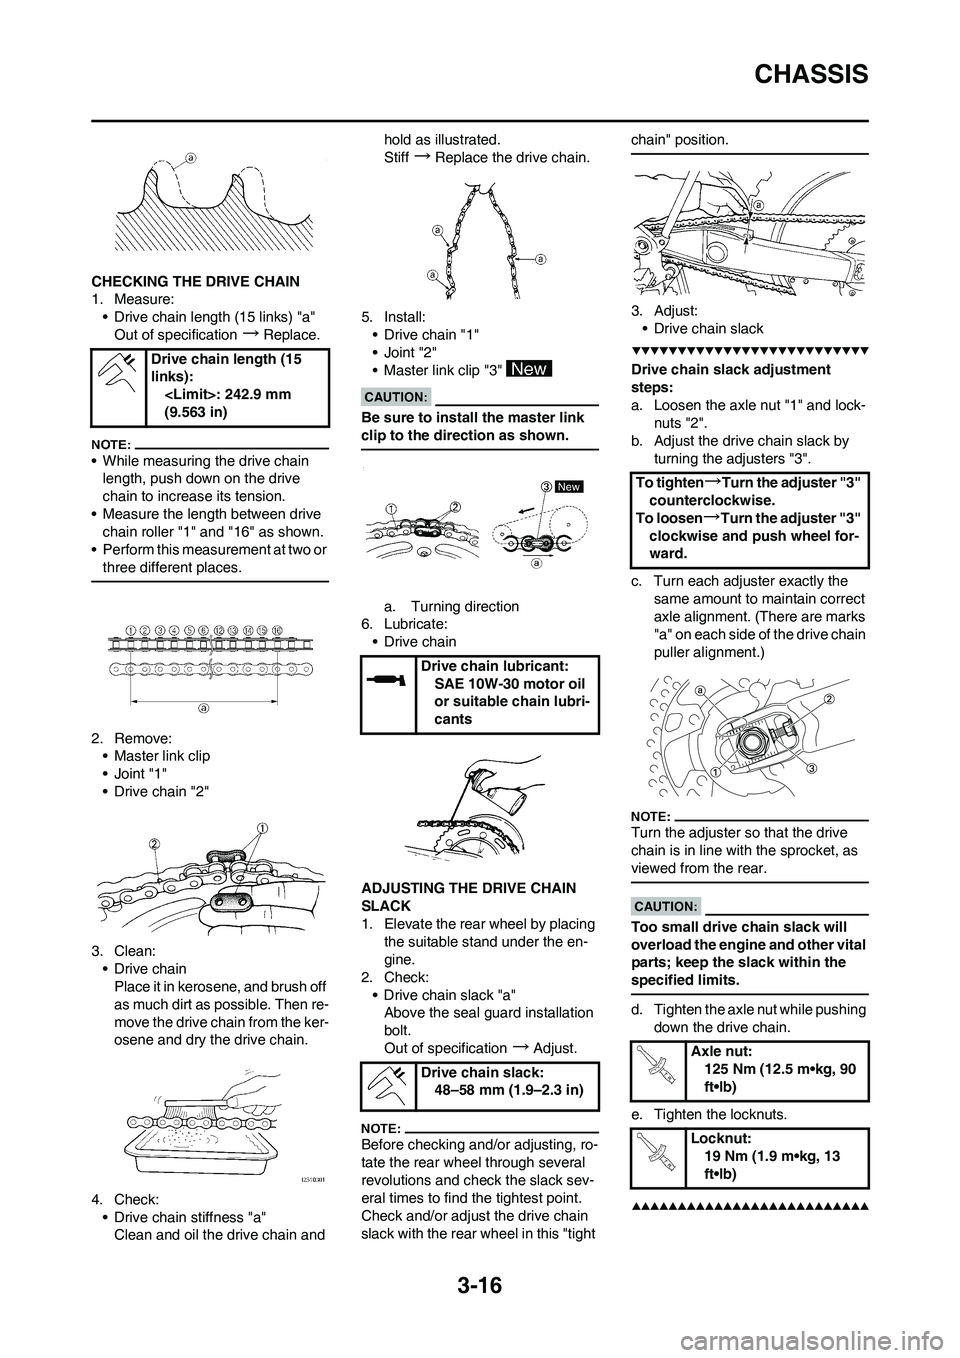 YAMAHA YZ450F 2008  Owners Manual 3-16
CHASSIS
CHECKING THE DRIVE CHAIN
1. Measure:
• Drive chain length (15 links) "a"
Out of specification
→Replace.
• While measuring the drive chain 
length, push down on the drive 
chain to i